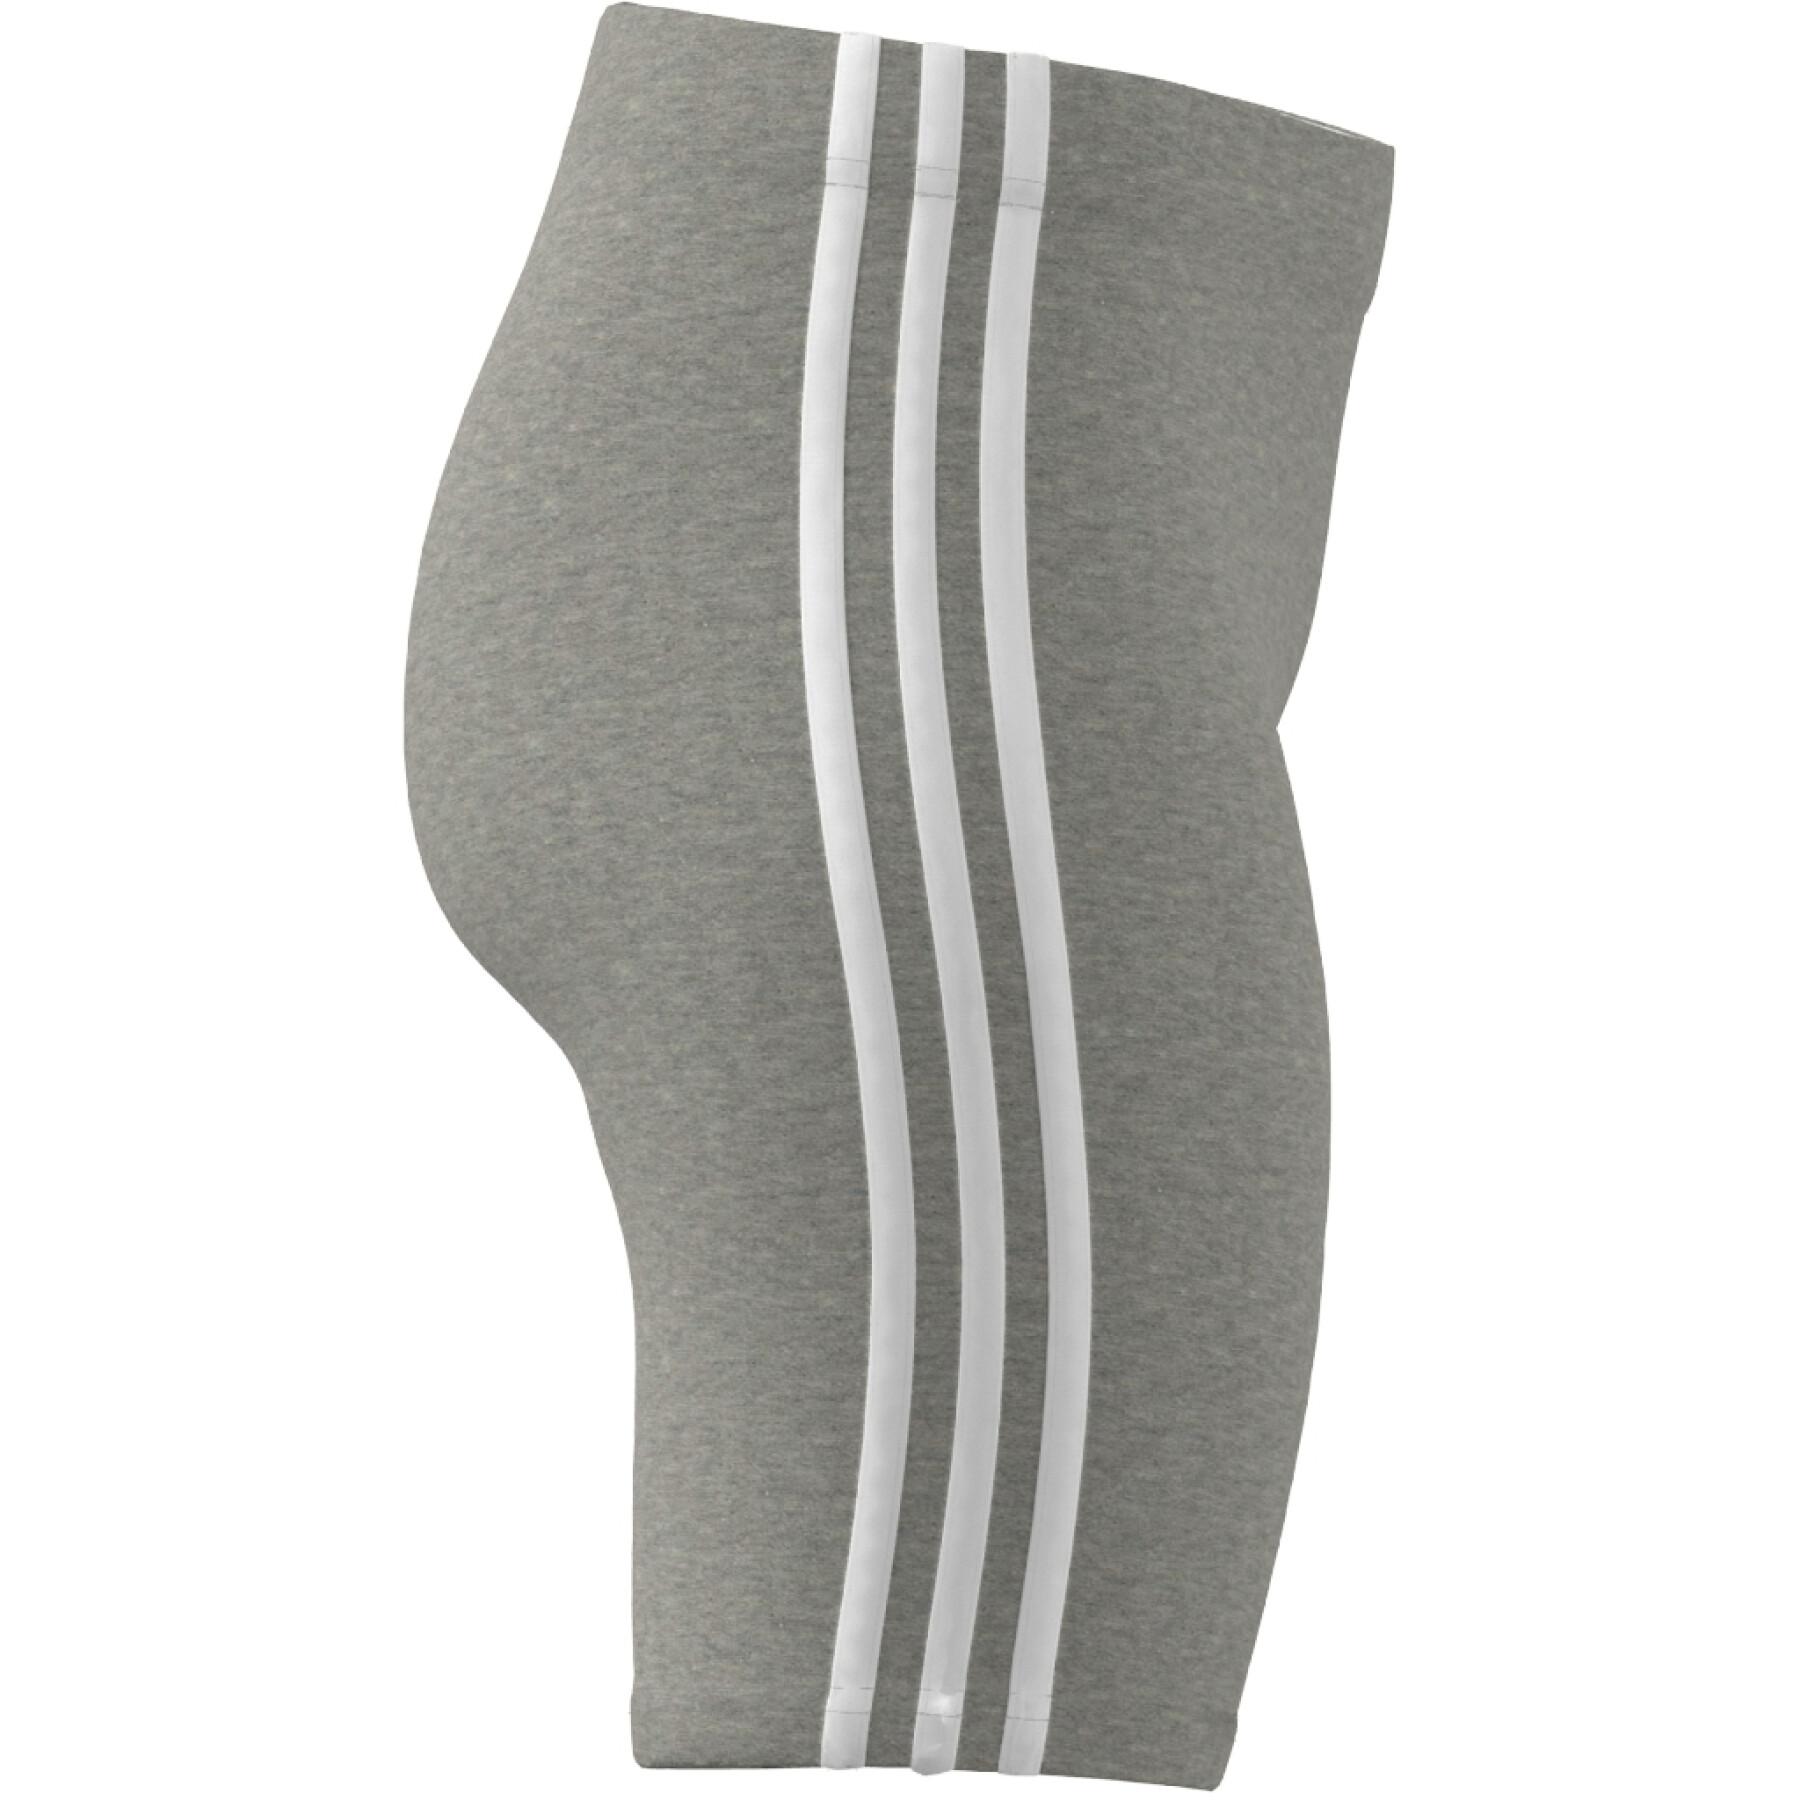 Cycling shorts with 3 stripes adidas Essentials